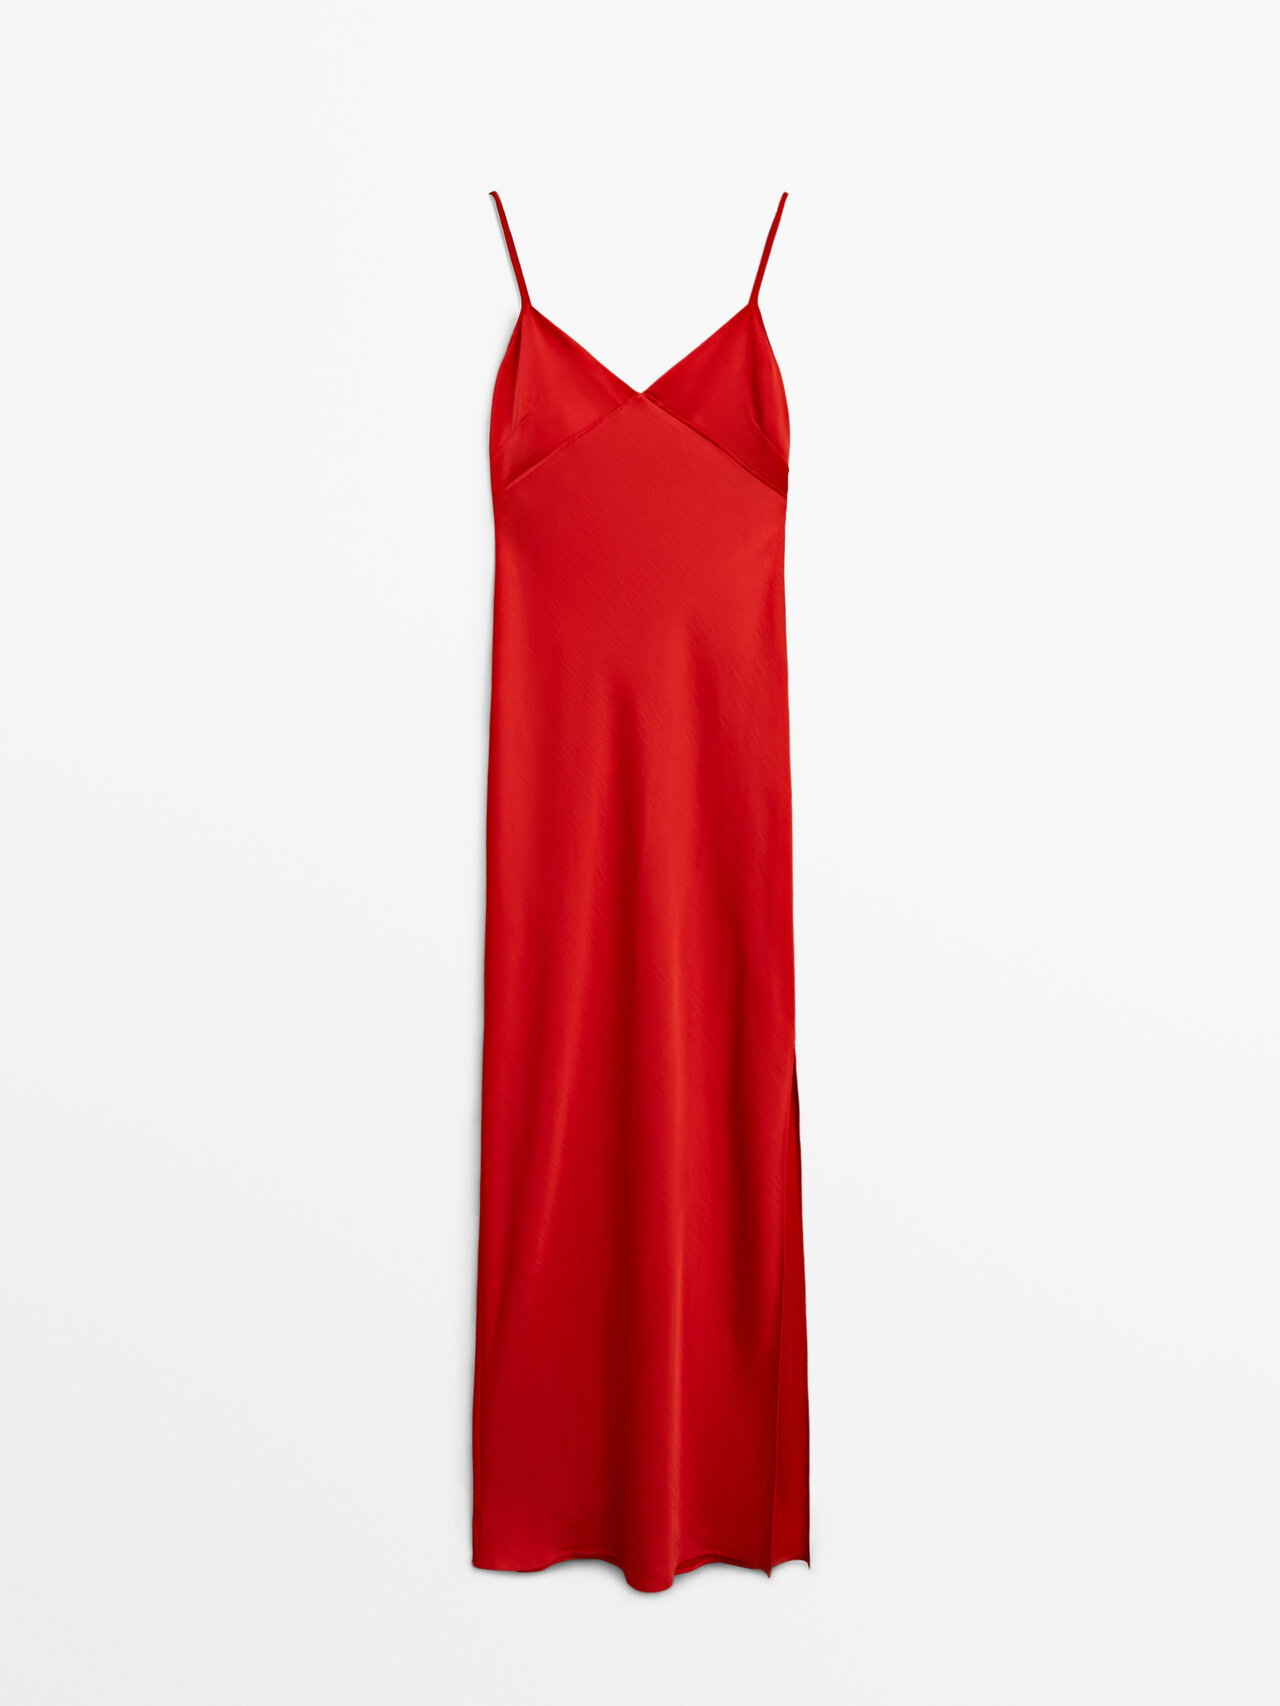 Massimo Dutti Long Satin Camisole Dress In Red